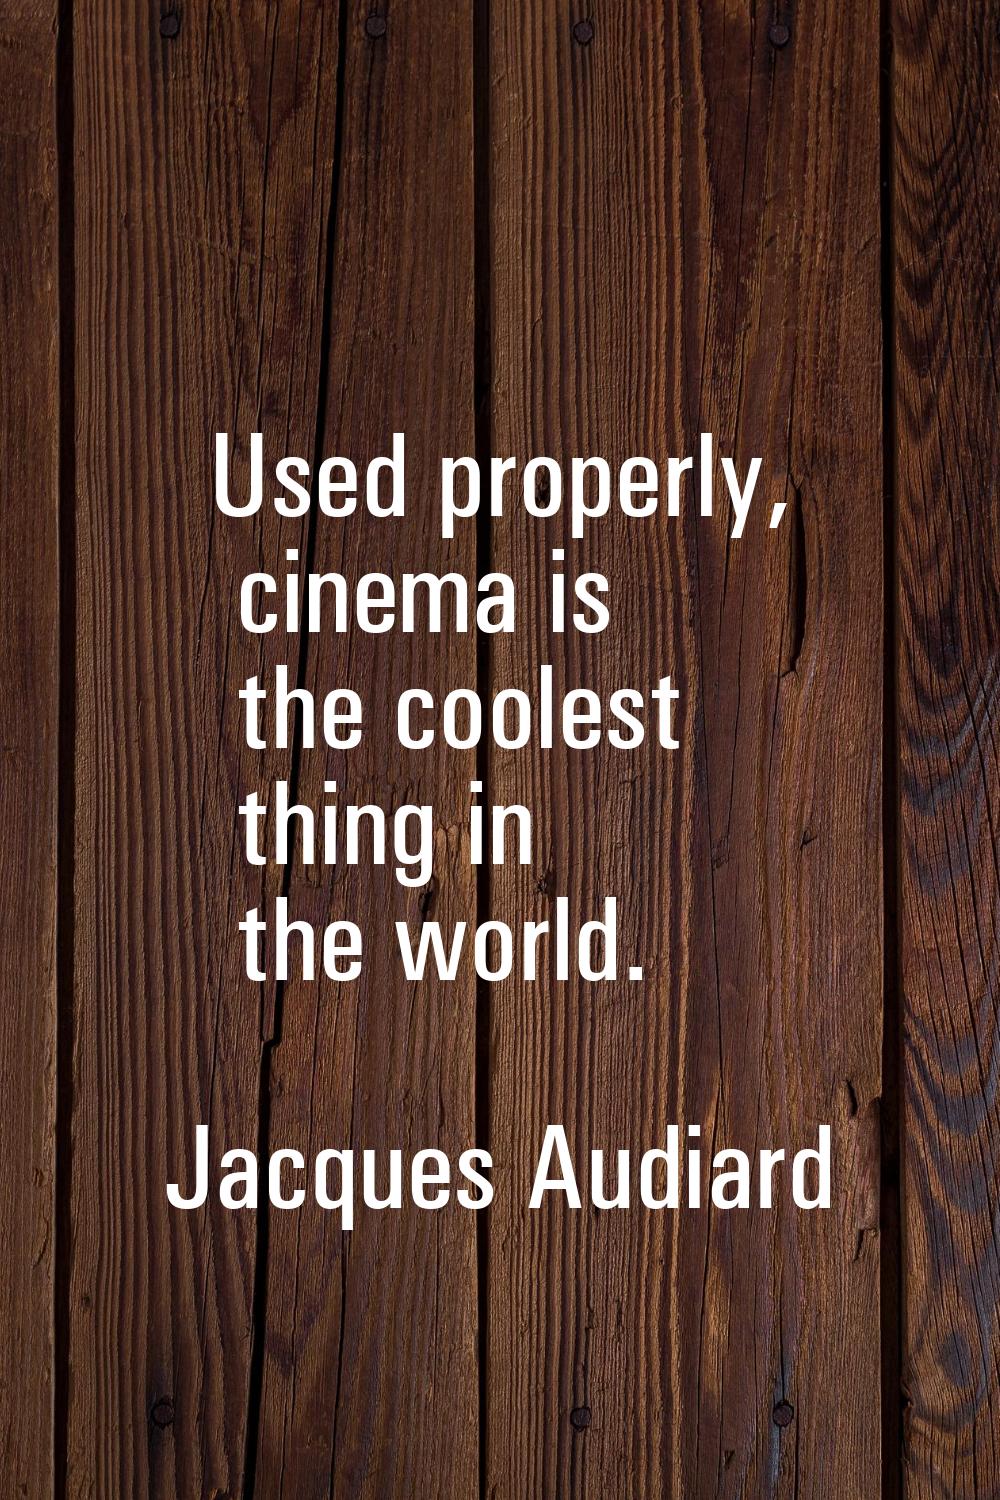 Used properly, cinema is the coolest thing in the world.